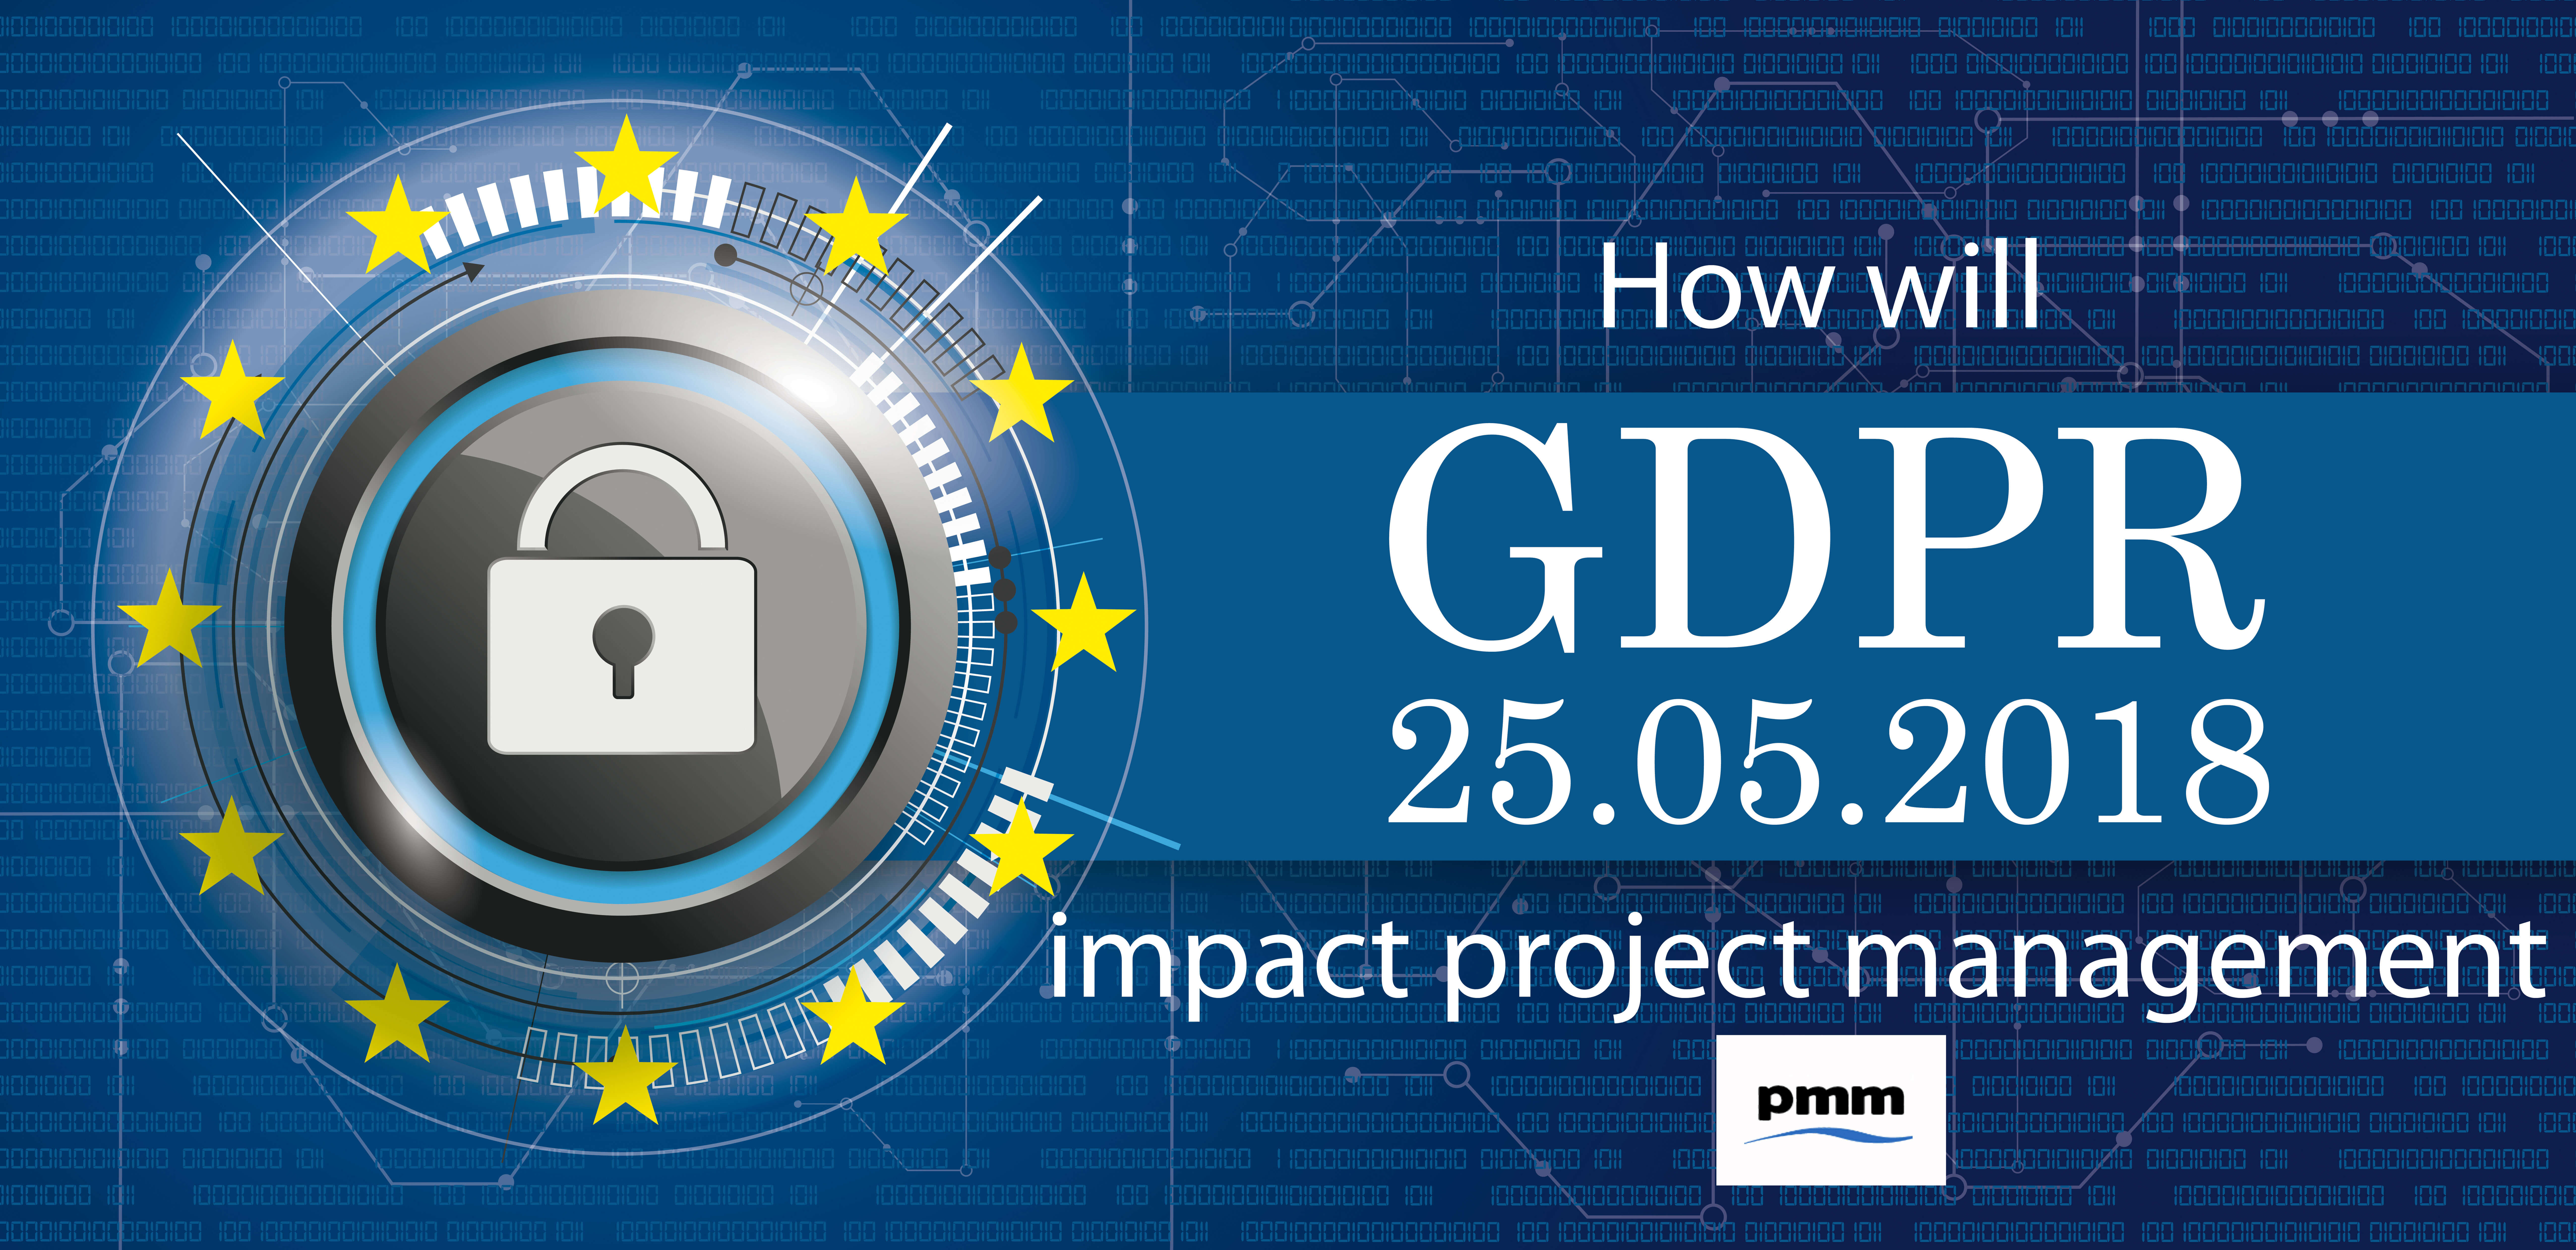 Potential impact of GDPR on project management